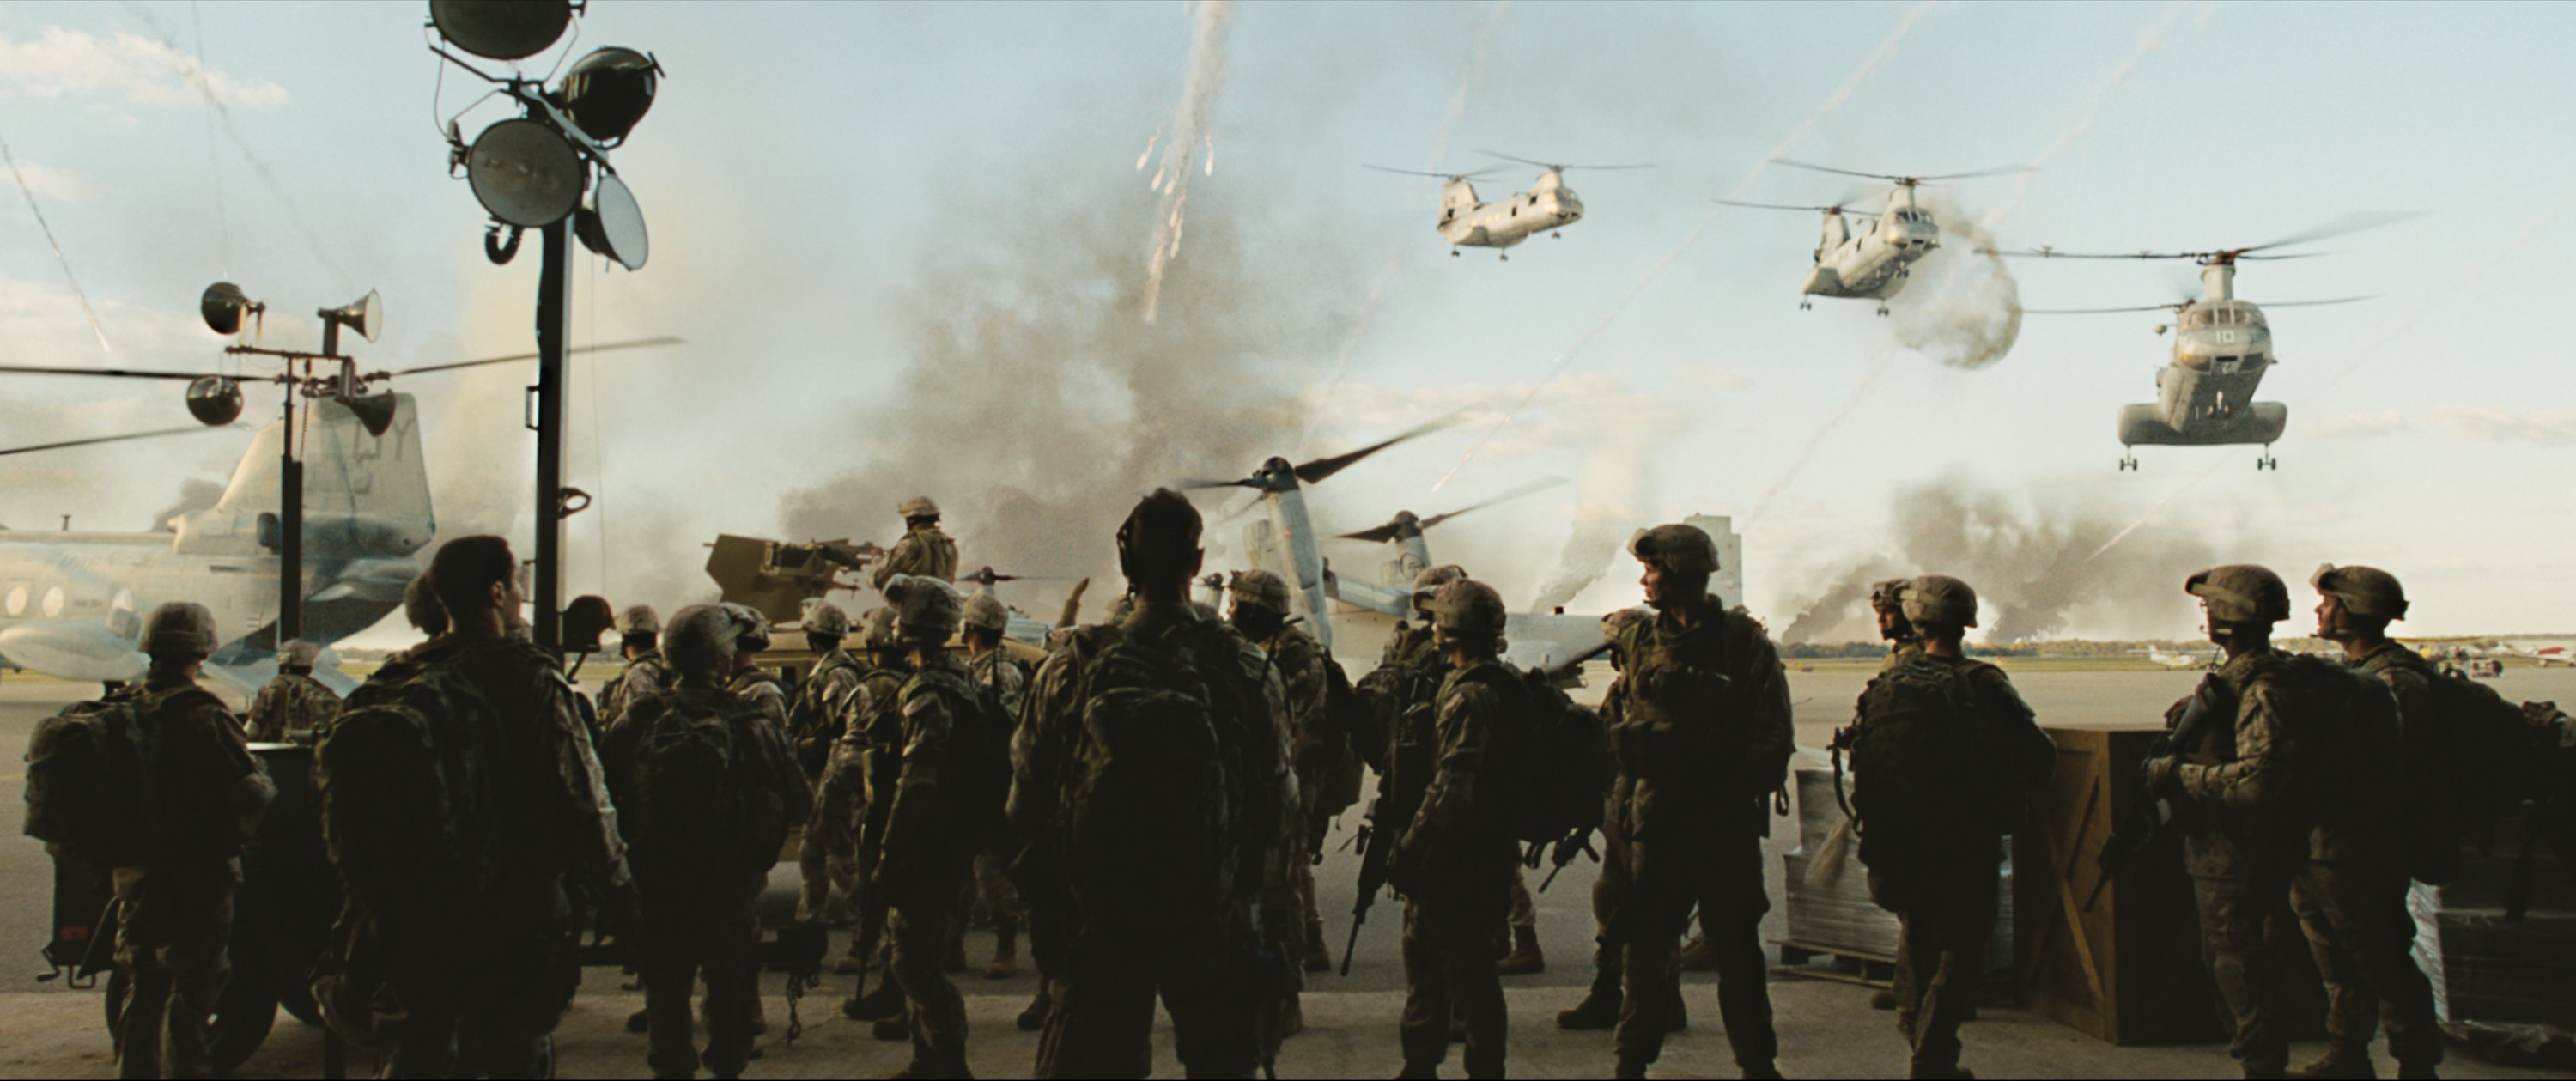 battle, Los, Angeles, Action, Sci fi, Drama, Military, Helicopter, Soldier Wallpaper